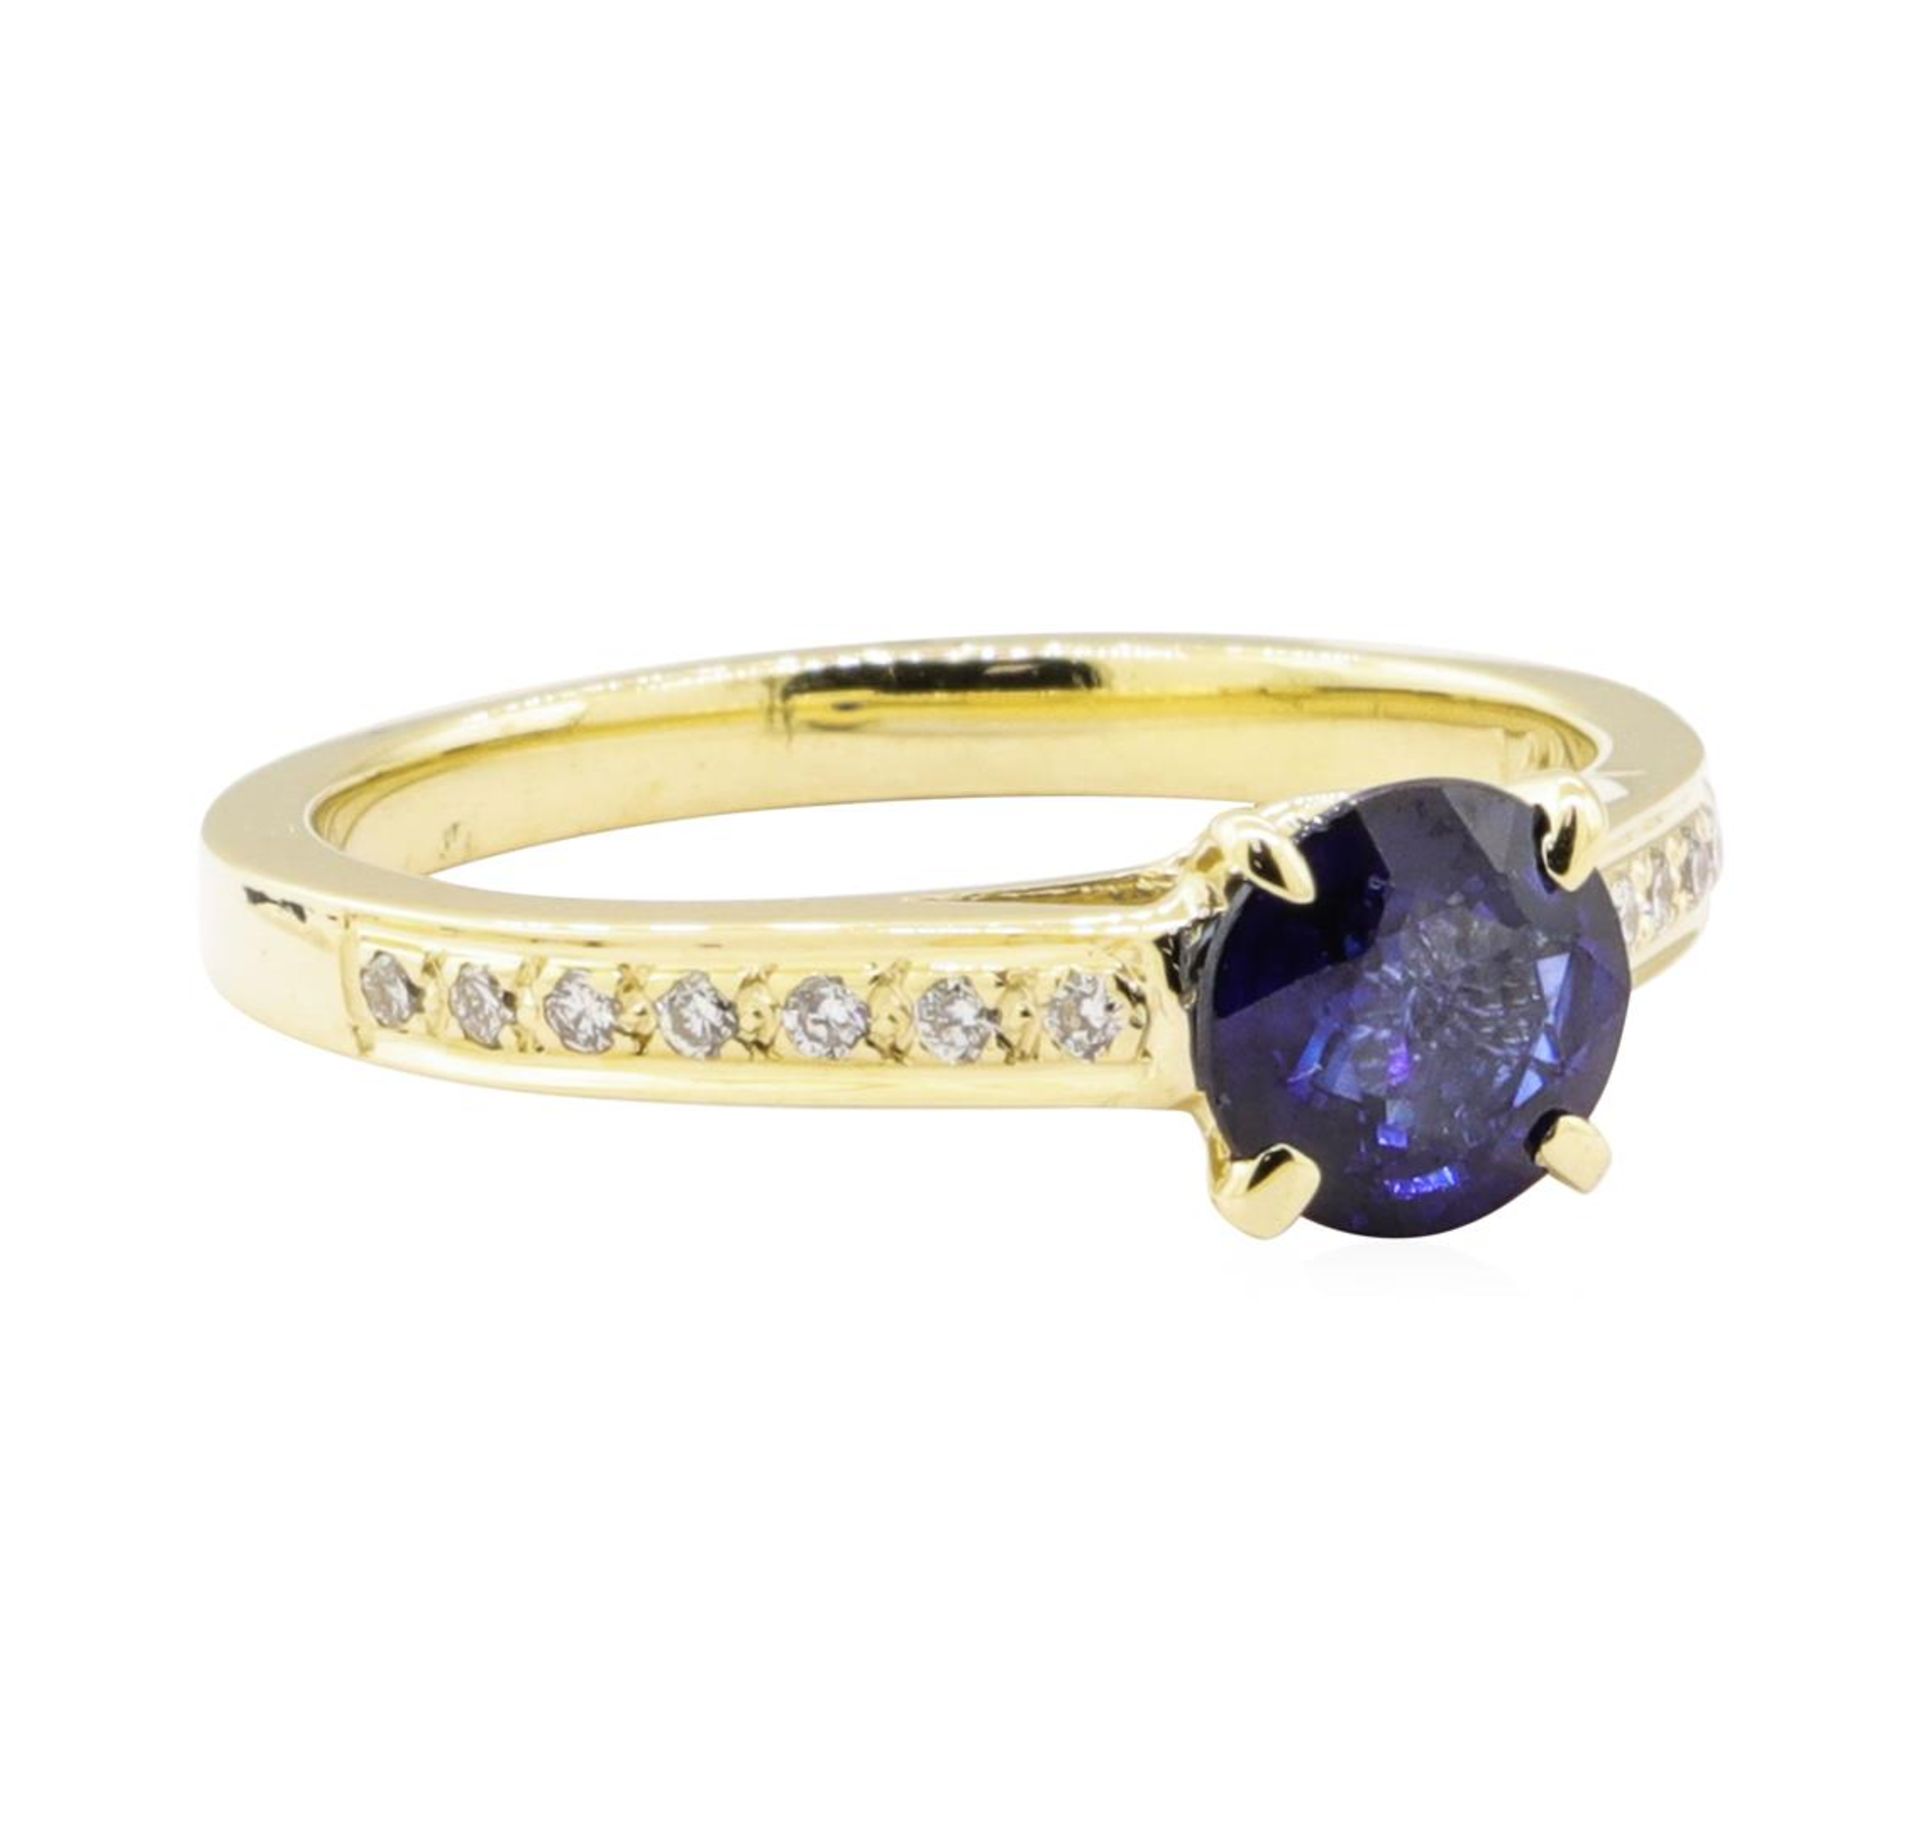 1.28ctw Blue Sapphire and Diamond Ring - 14KT Yellow Gold